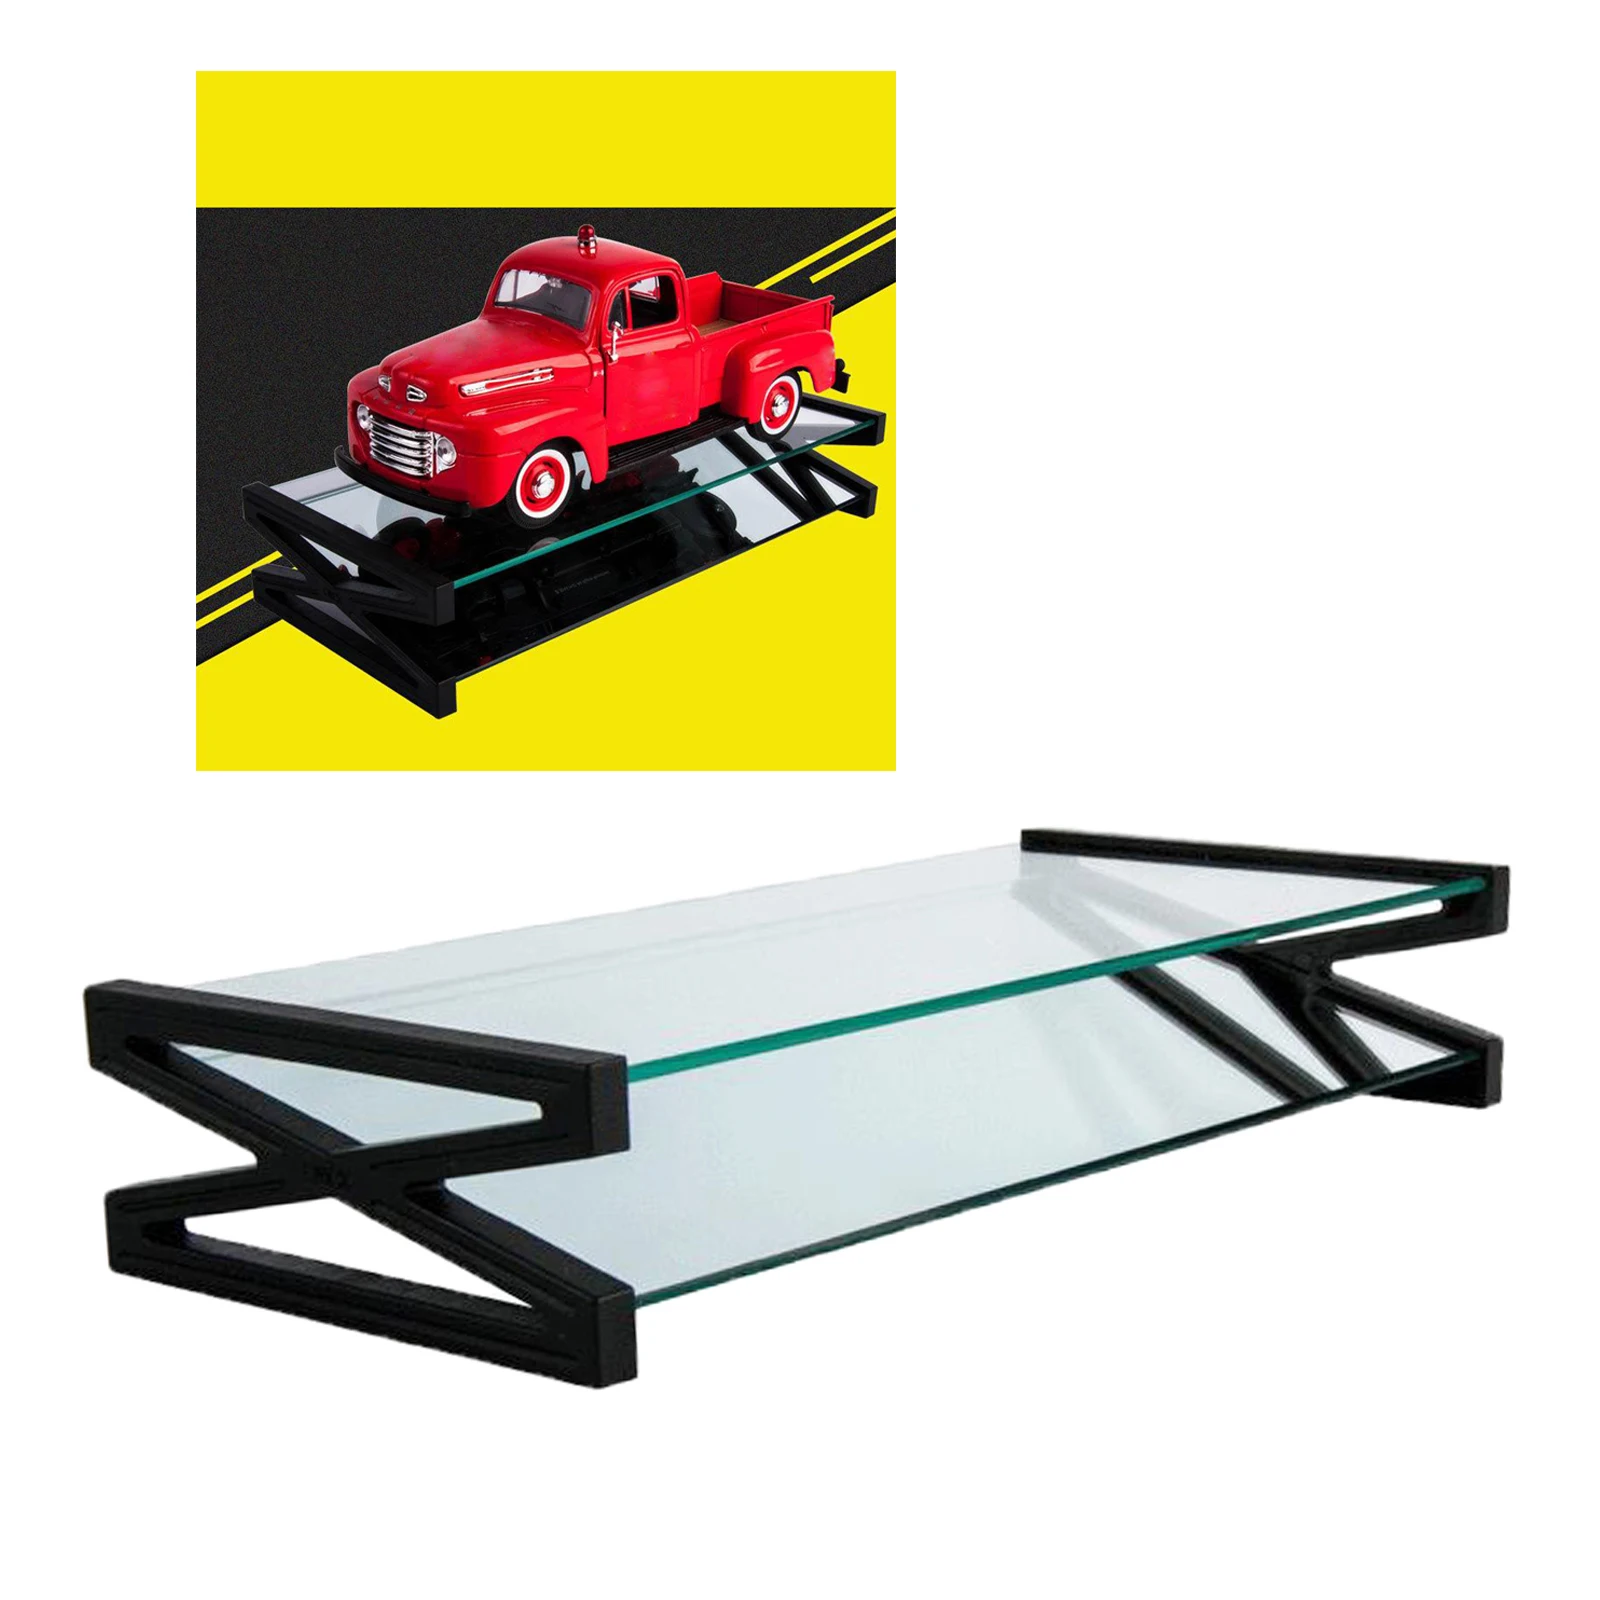 Transparent Universal Display Stand Base Case for Model Cars Collectibles